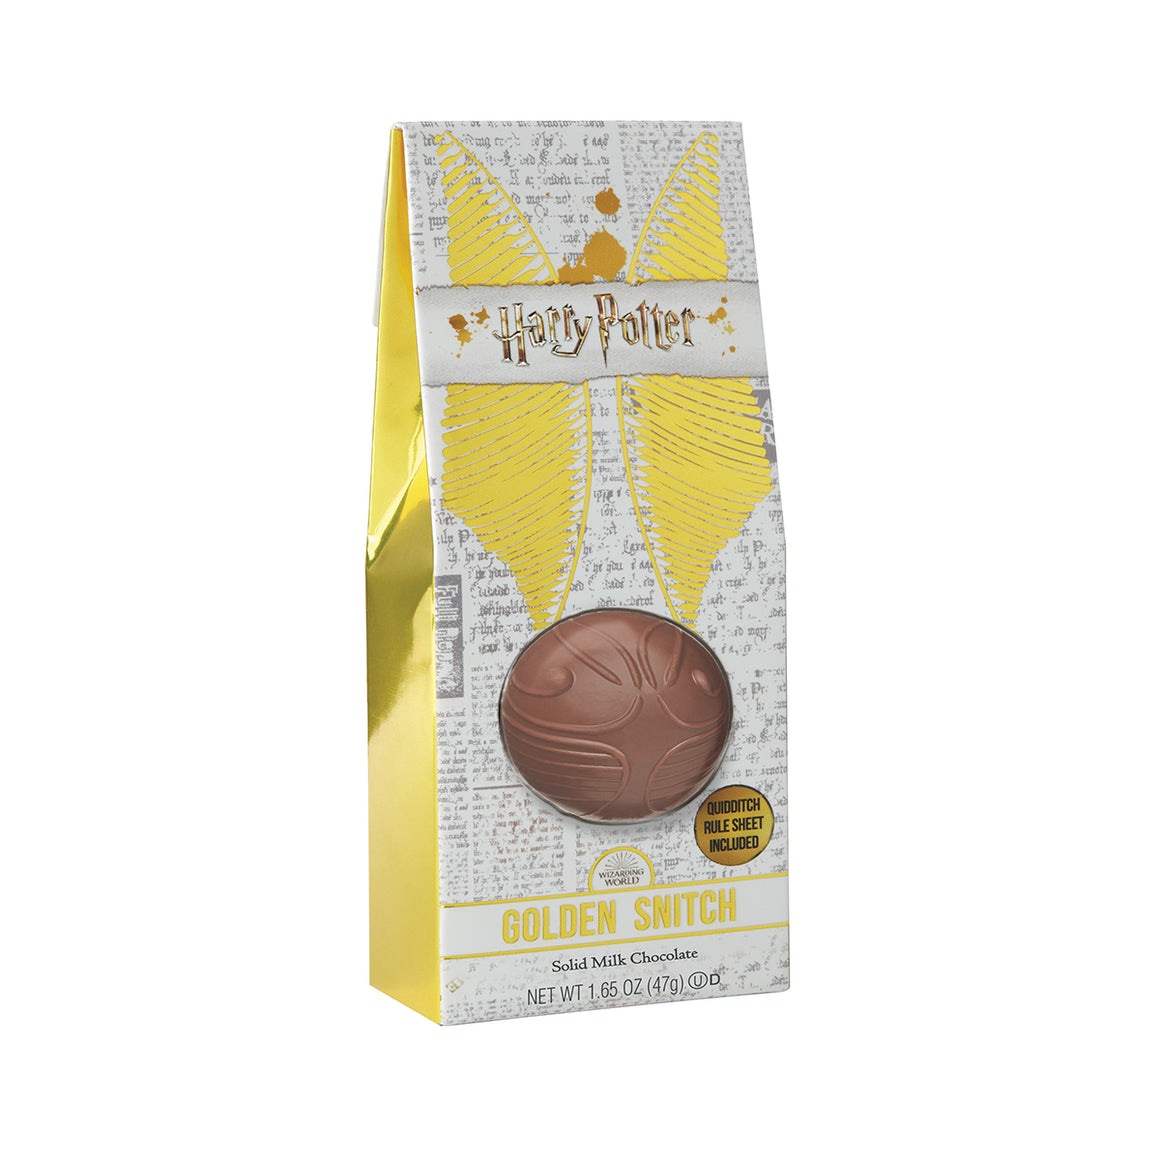 Harry Potter Solid Milk Chocolate Golden Snitch